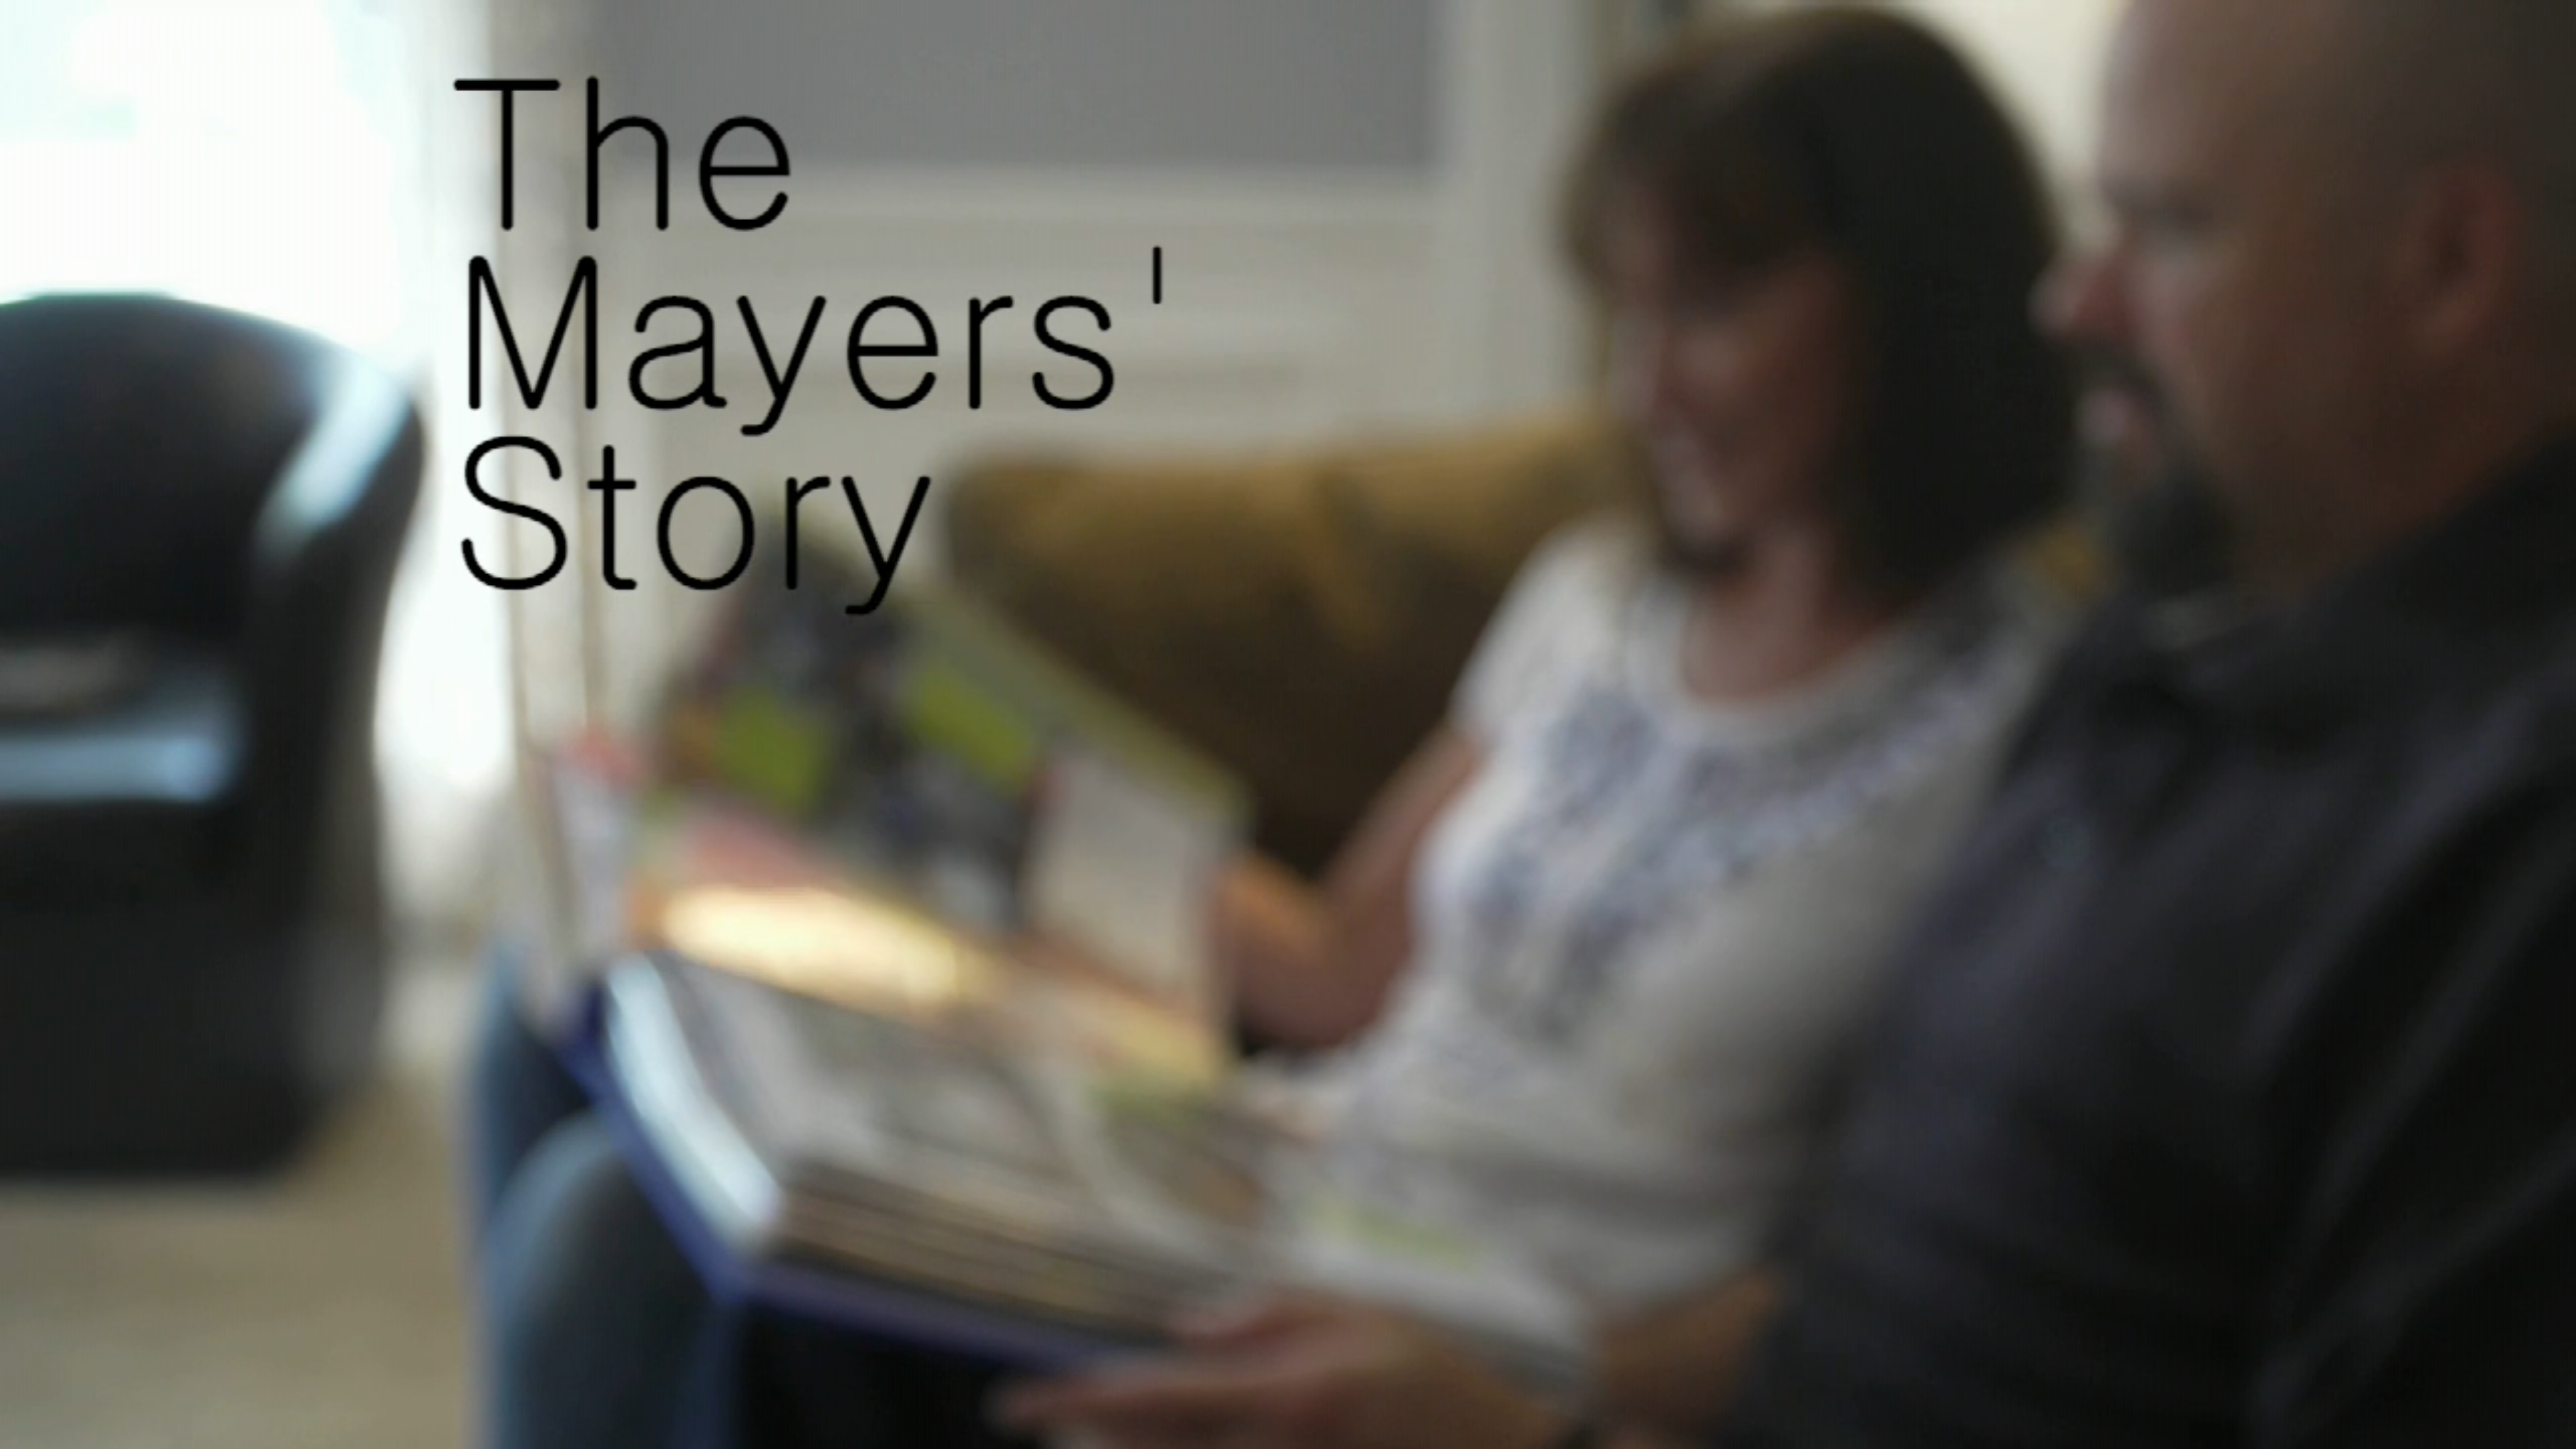 The Mayer's Story